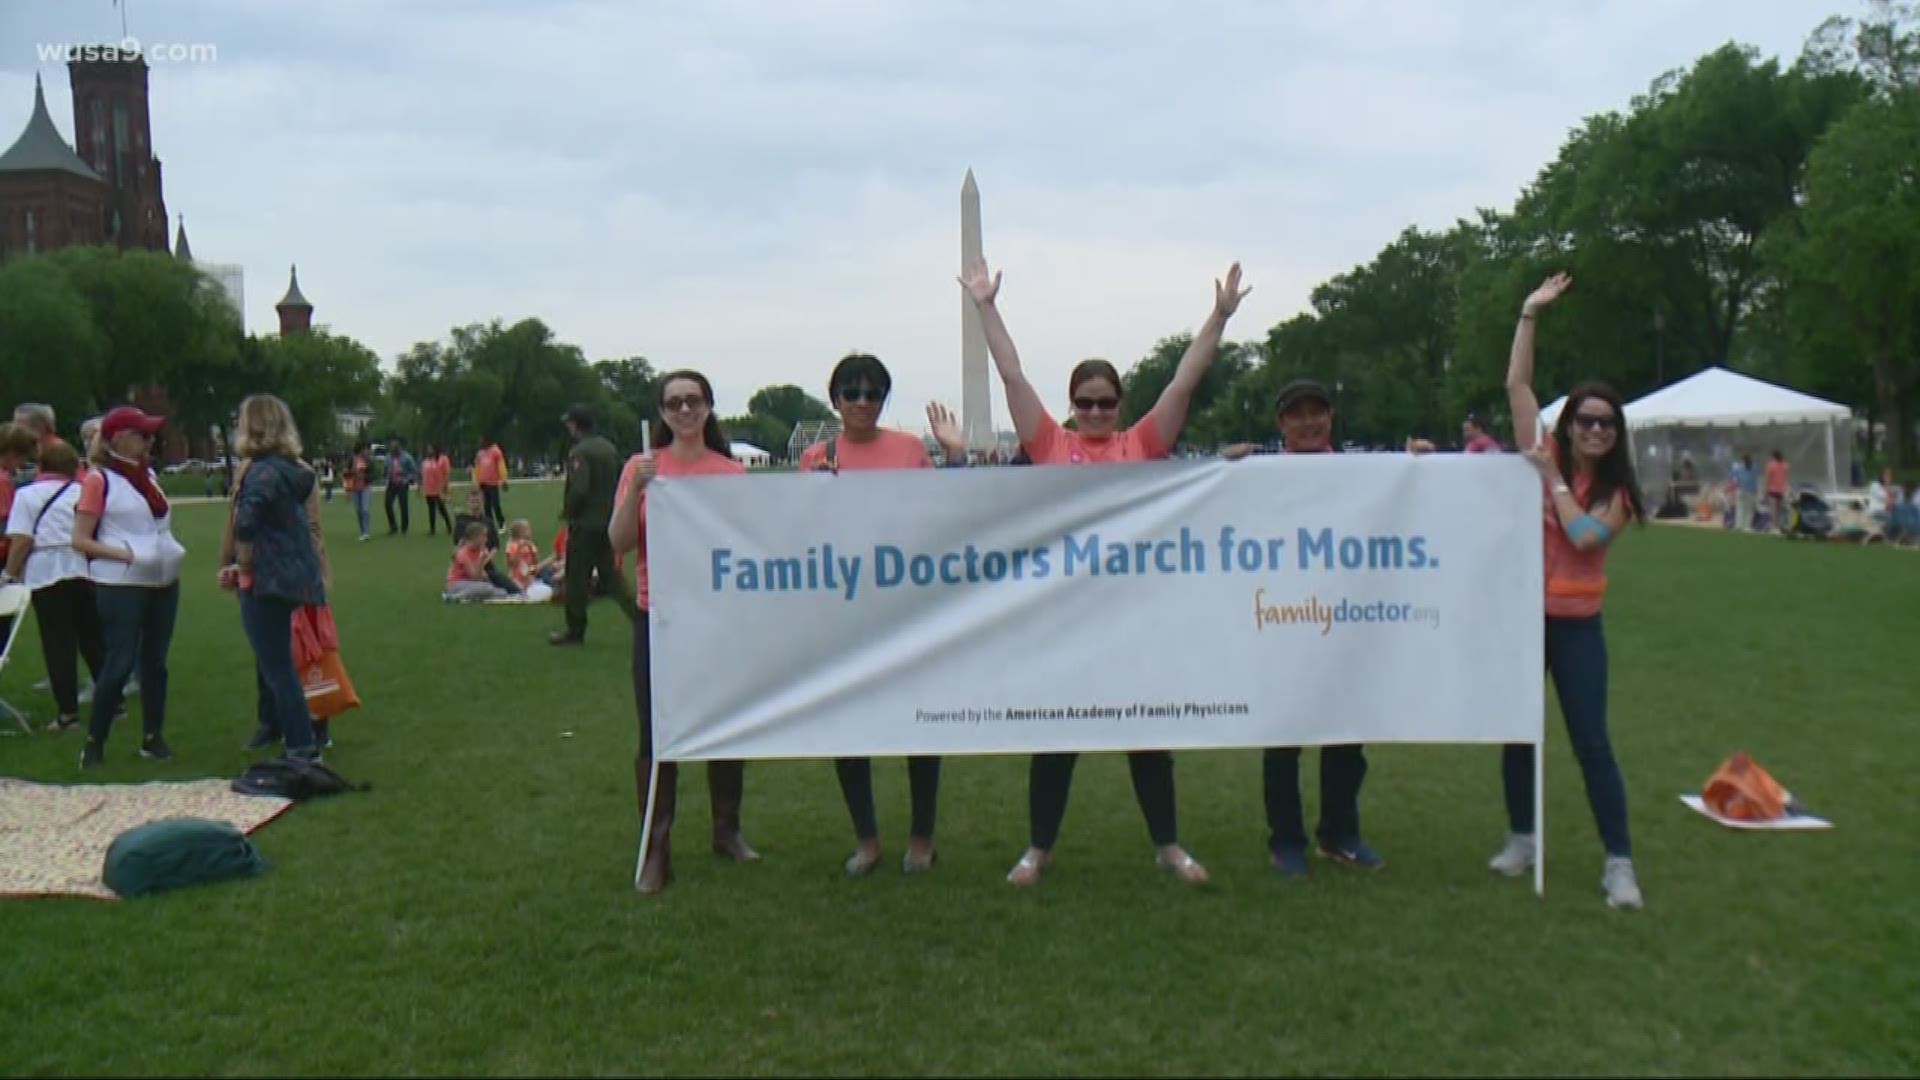 Organizers of today's March for Moms want extended medicaid, post-partum treatment and other services to help women deliver healthy babies.